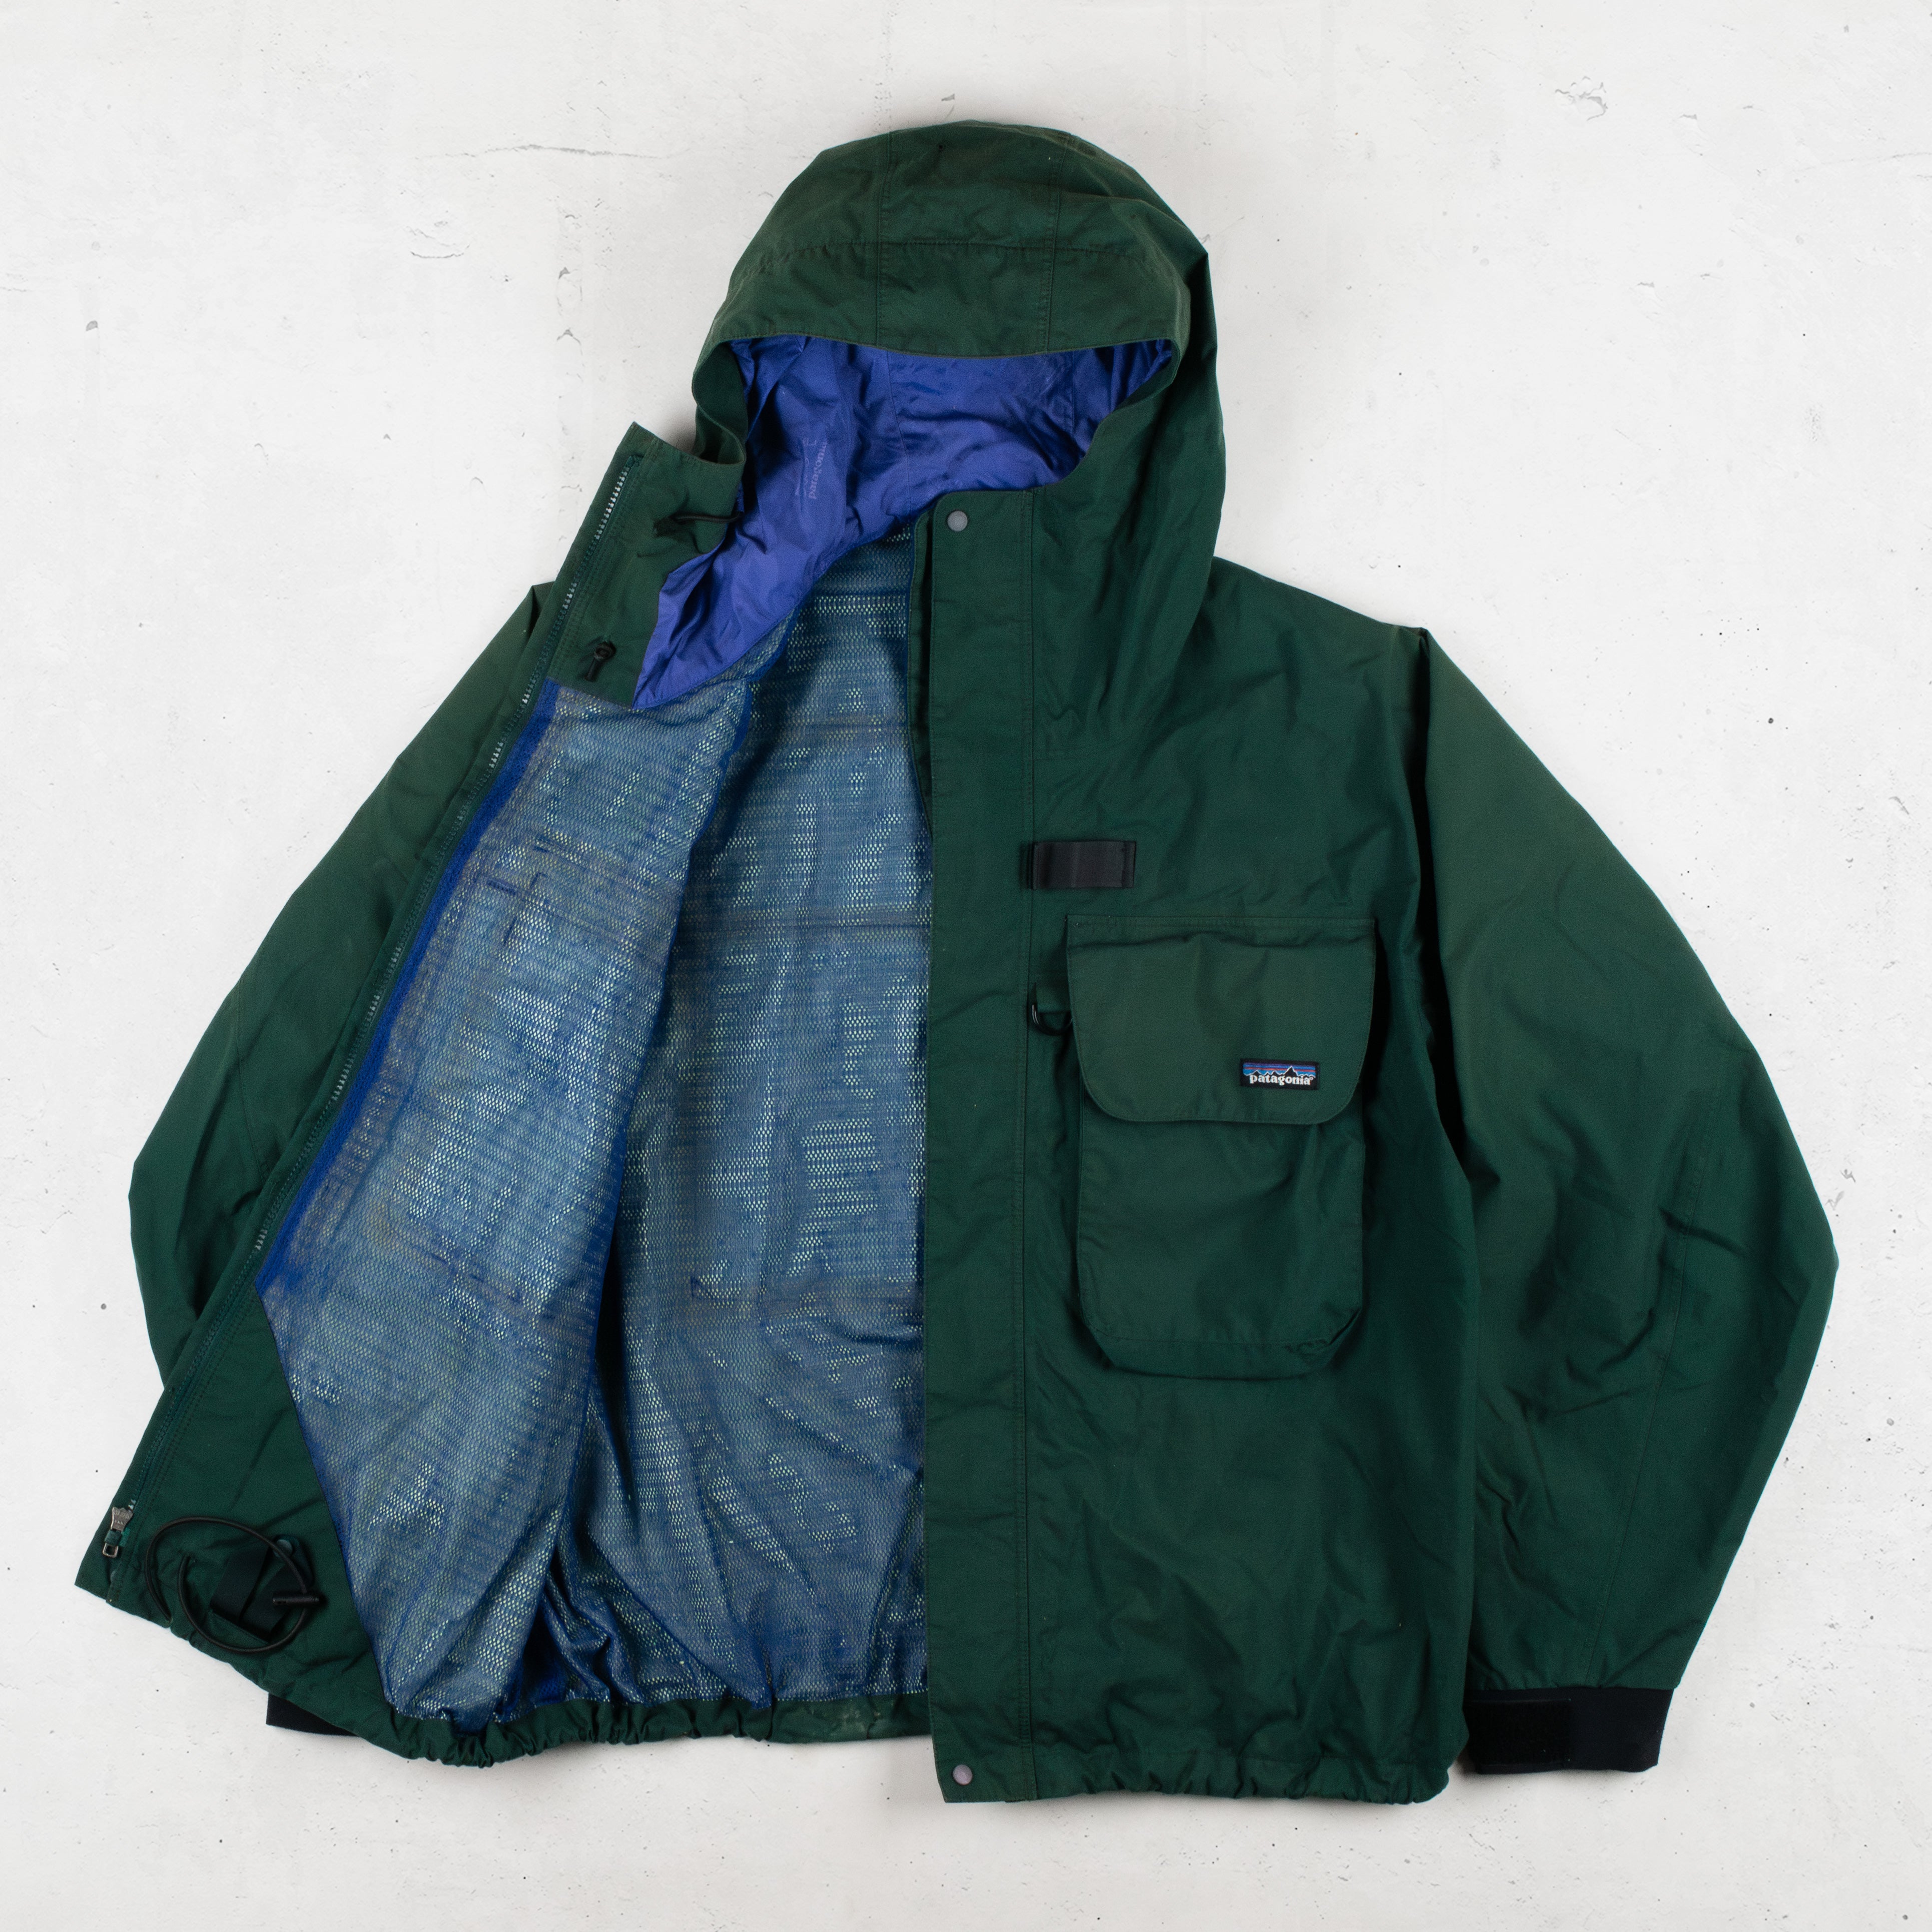 PATAGONIA - 1995 - SST WADING JACKET - FOREST GREEN - XXL - VINTAGE –  ARCHIVESPHERE ®